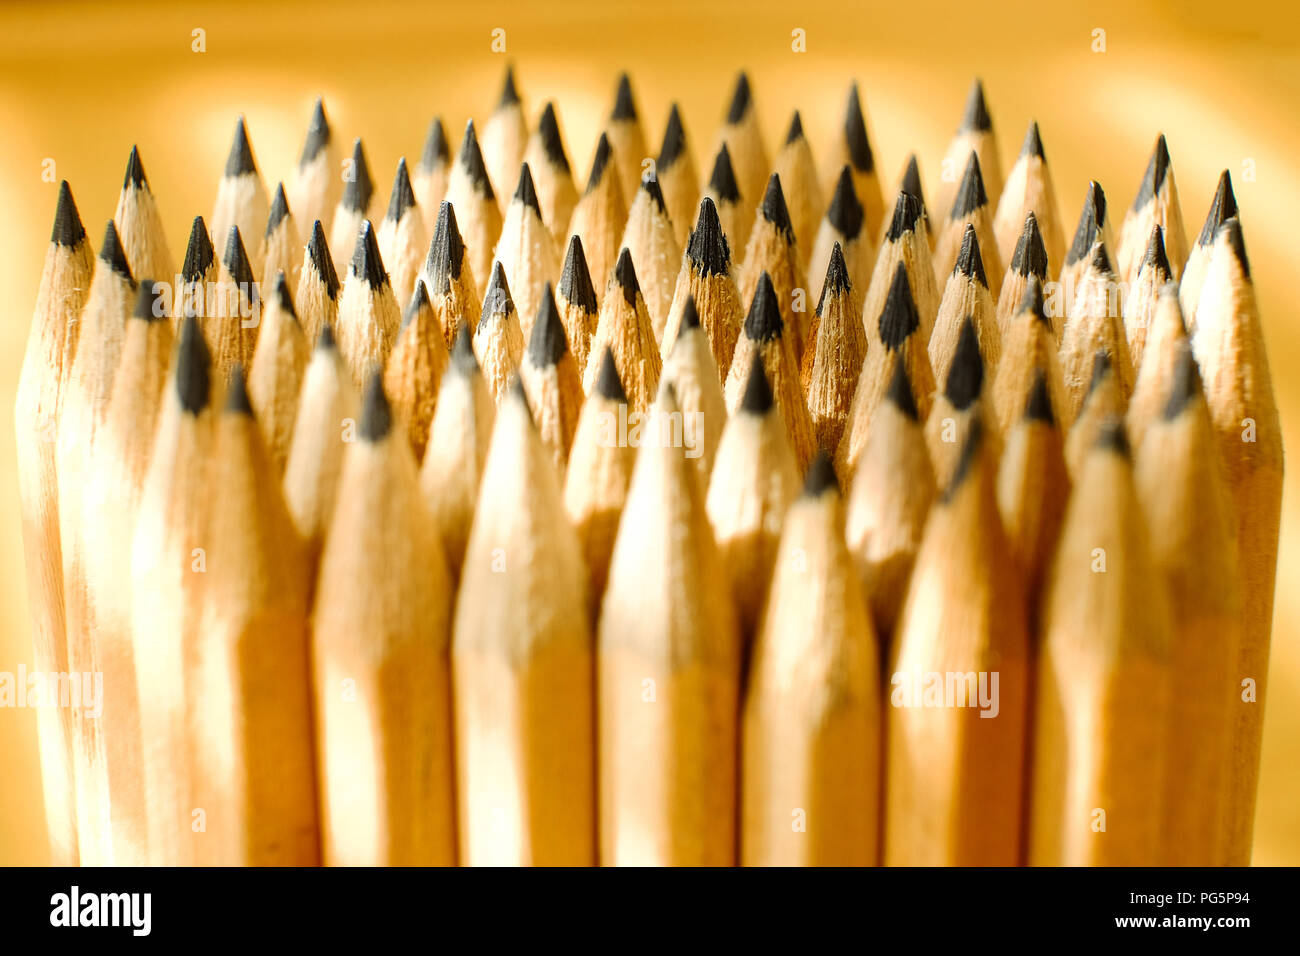 Packing of simple pencils. Many pencils piled in a big pile object Stock  Photo - Alamy